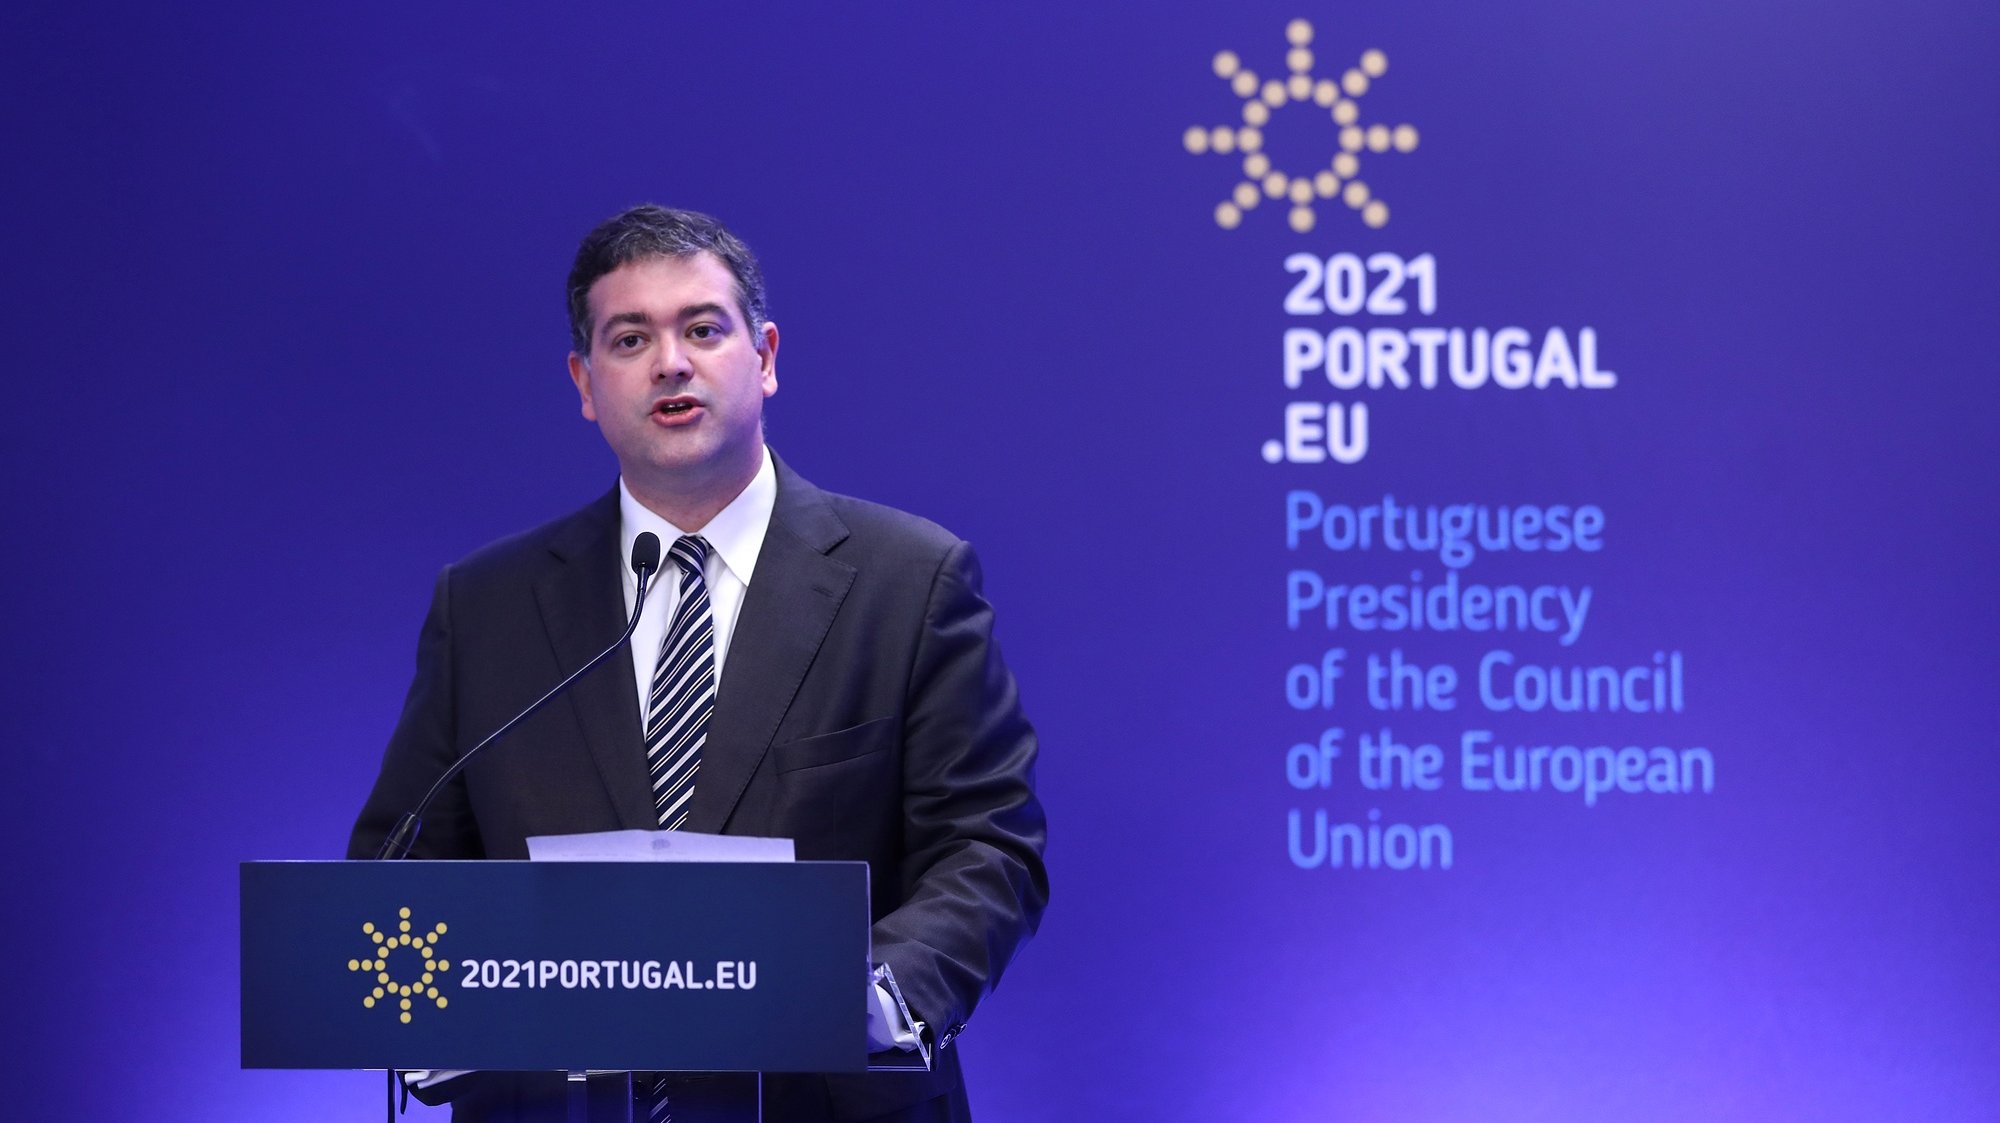 President of Portuguese Agency for Investment and Foreign Trade (AICEP) Portugal Global Luis Castro Henriques attends a Portugal-Africa Business Seminar: &quot;Exporting &#039;Green&#039;: Internationalization in a sustainable era&quot; included in the official program of the Portuguese Presidency of the EU Council in Lisbon, Portugal, 22 April 2021. The purpose of this event is to stimulate joint action on sustainable development, creating bridges between Europe and Africa in the green economy sector, focusing on exports and investment as drivers of sustainable economic development for Portuguese and African relations. ANTONIO PEDRO SANTOS/LUSA